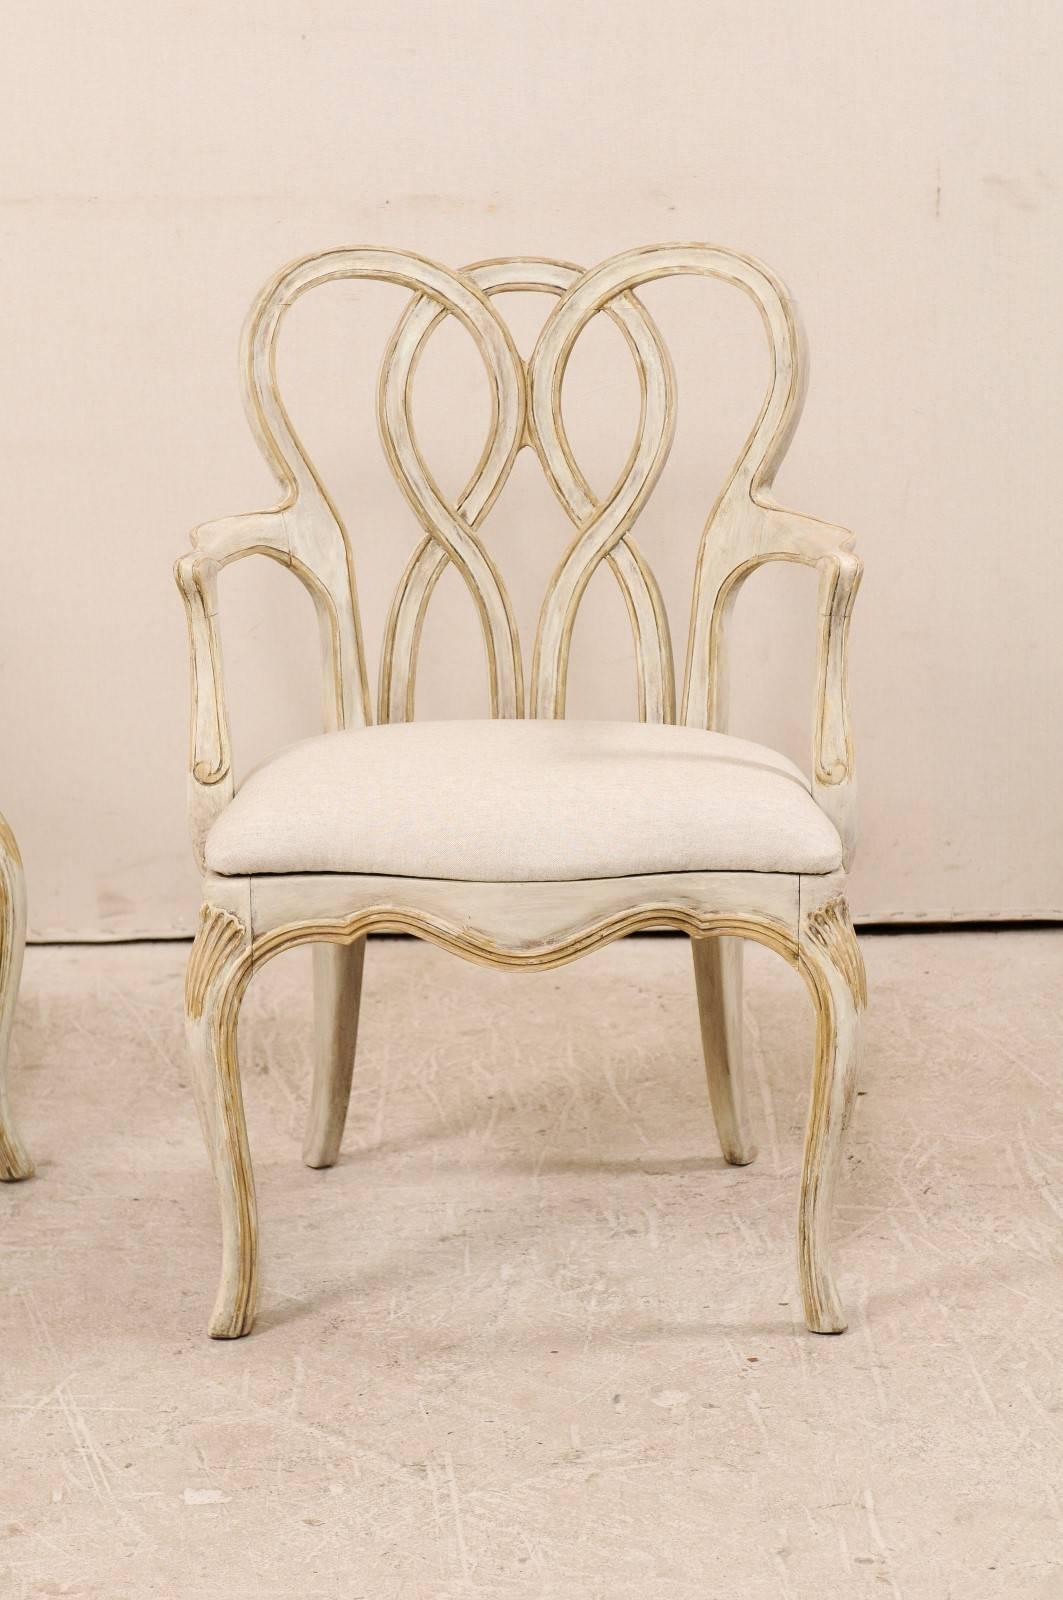 Carved Pair of Venetian Style Painted Wood Armchairs with Intertwined Back-Splats